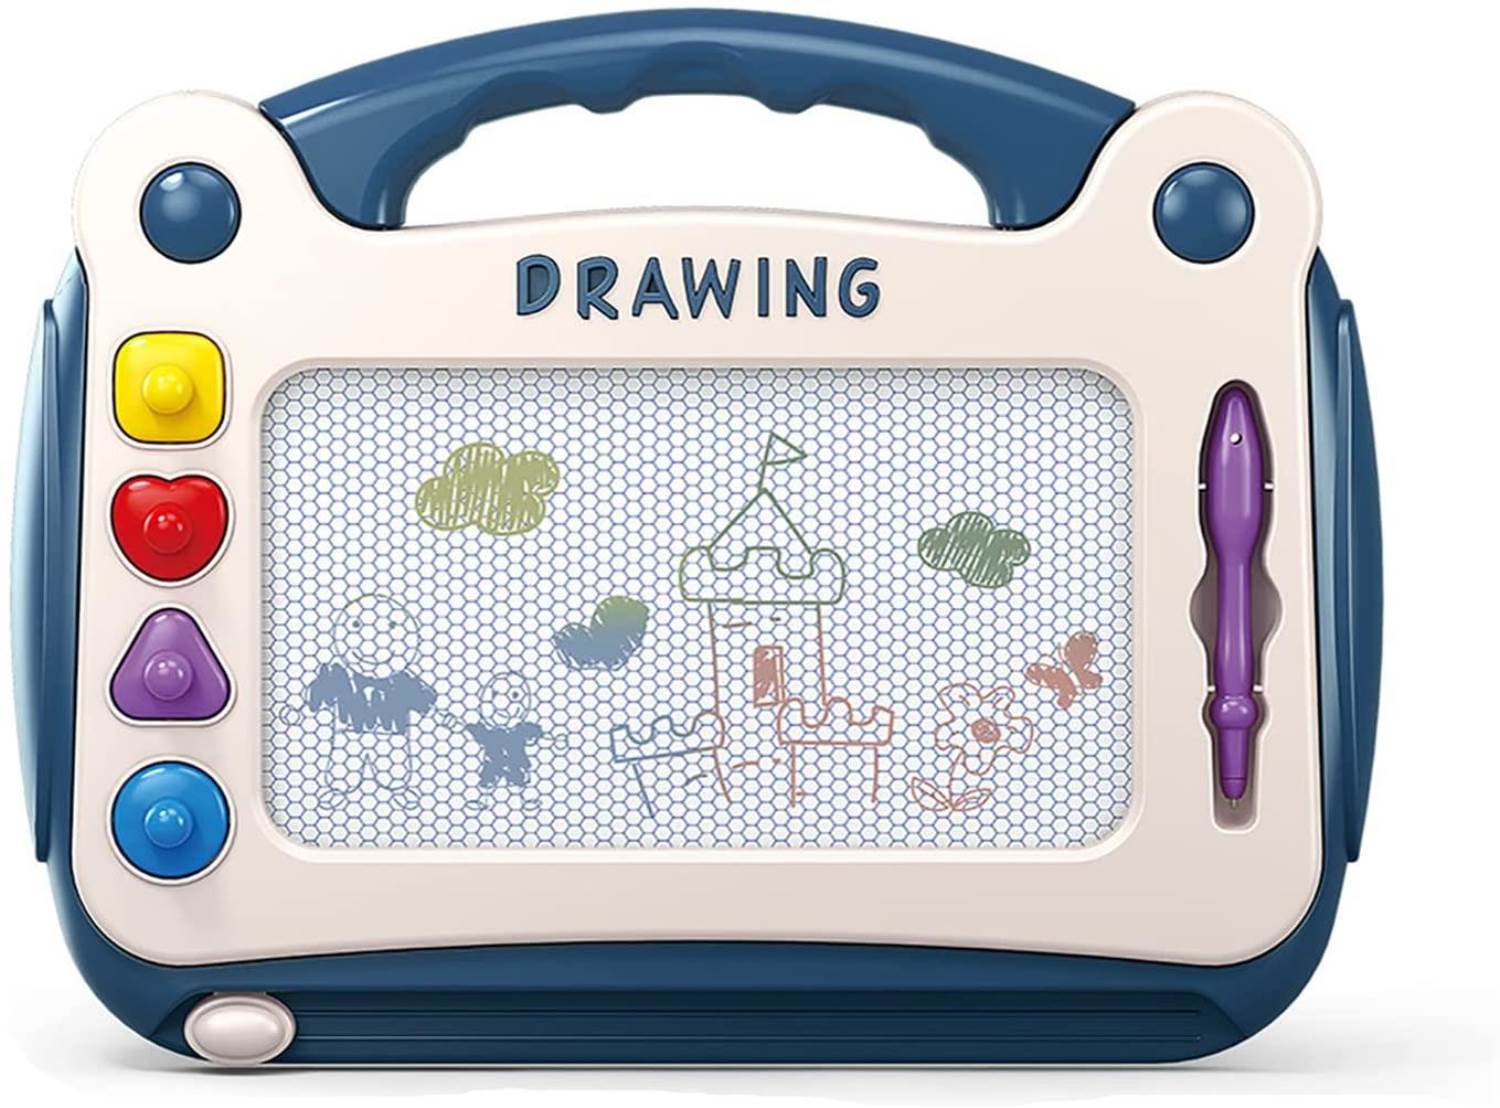 Magnetic Drawing Board Educational Toy - Sketch Pad for Kids, Draw Fre